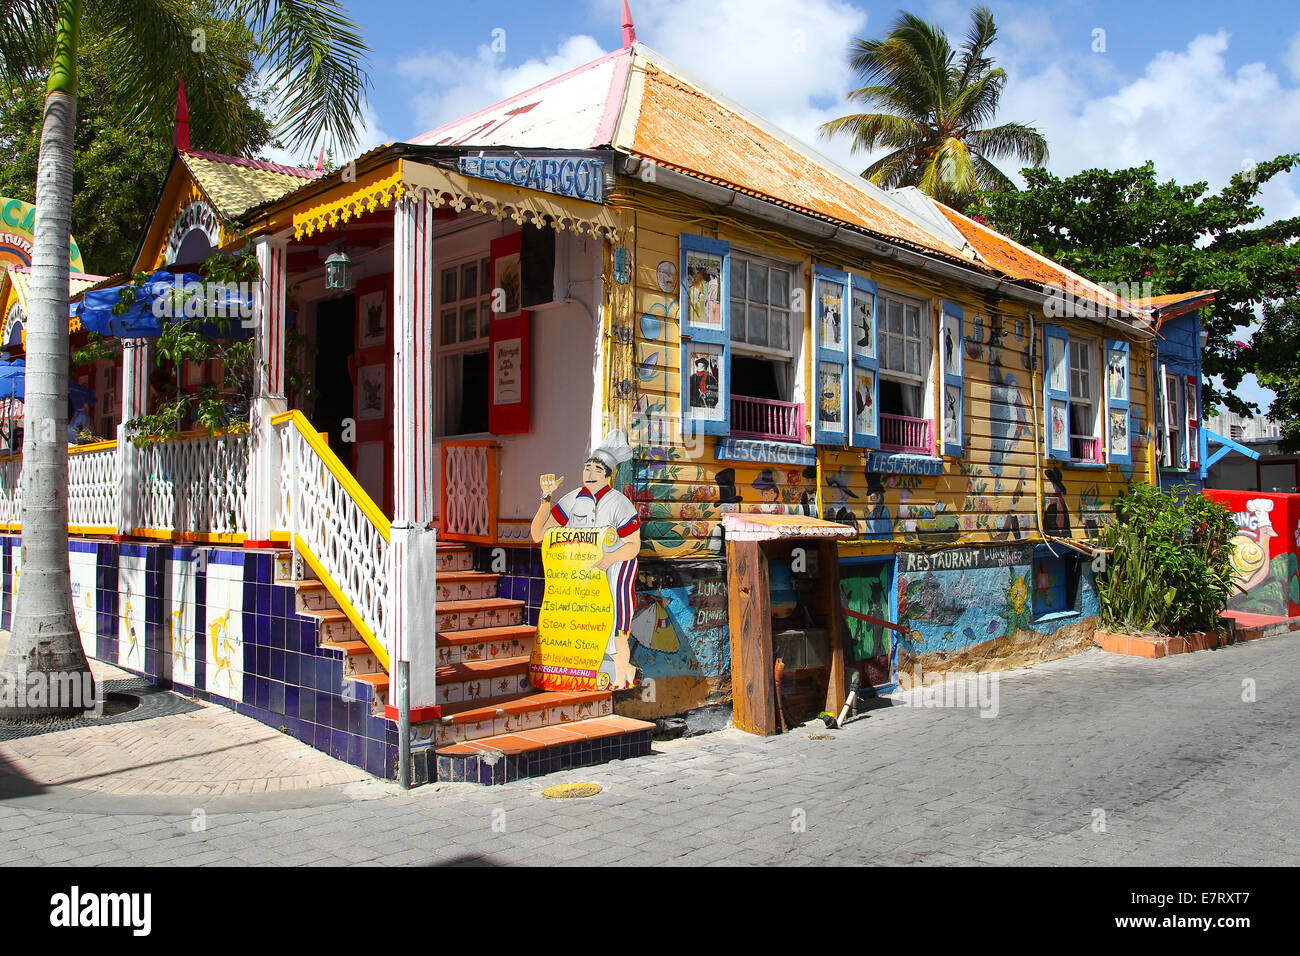 A Colorful Restaurant in St Maarten in The Caribbean Stock Photo